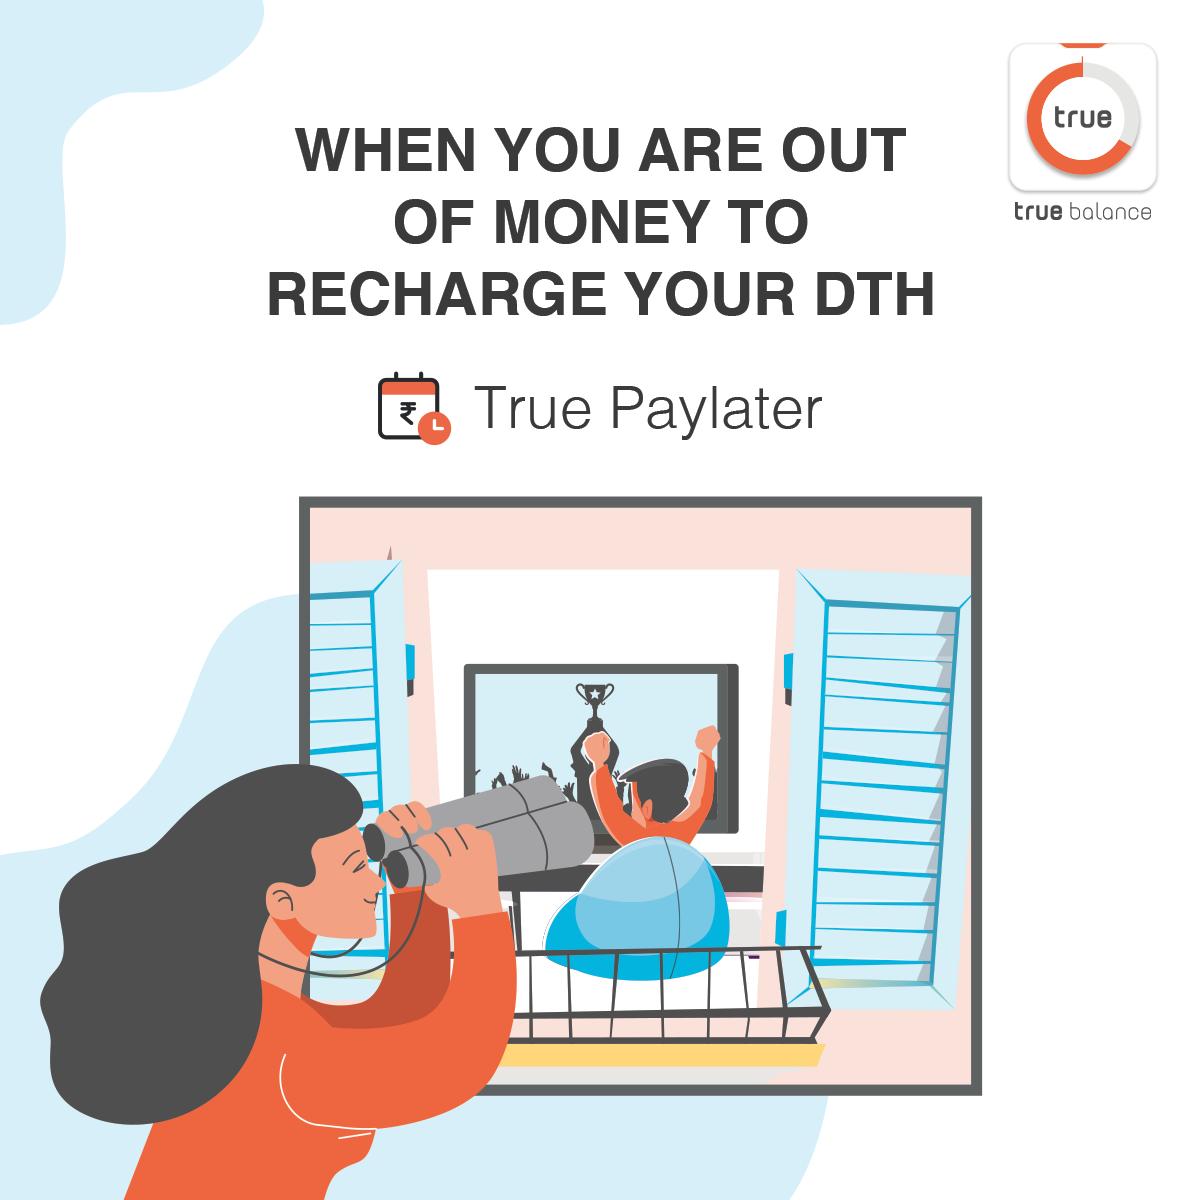 Use True PayLater to beat money problems, any time of the month.
Know More: goo.gl/qvSEgX
#TruePayLater #PayLater #TrueBalanceApp #MoneyCrisis #SalaryDelay #Recharges #DTHRecharge